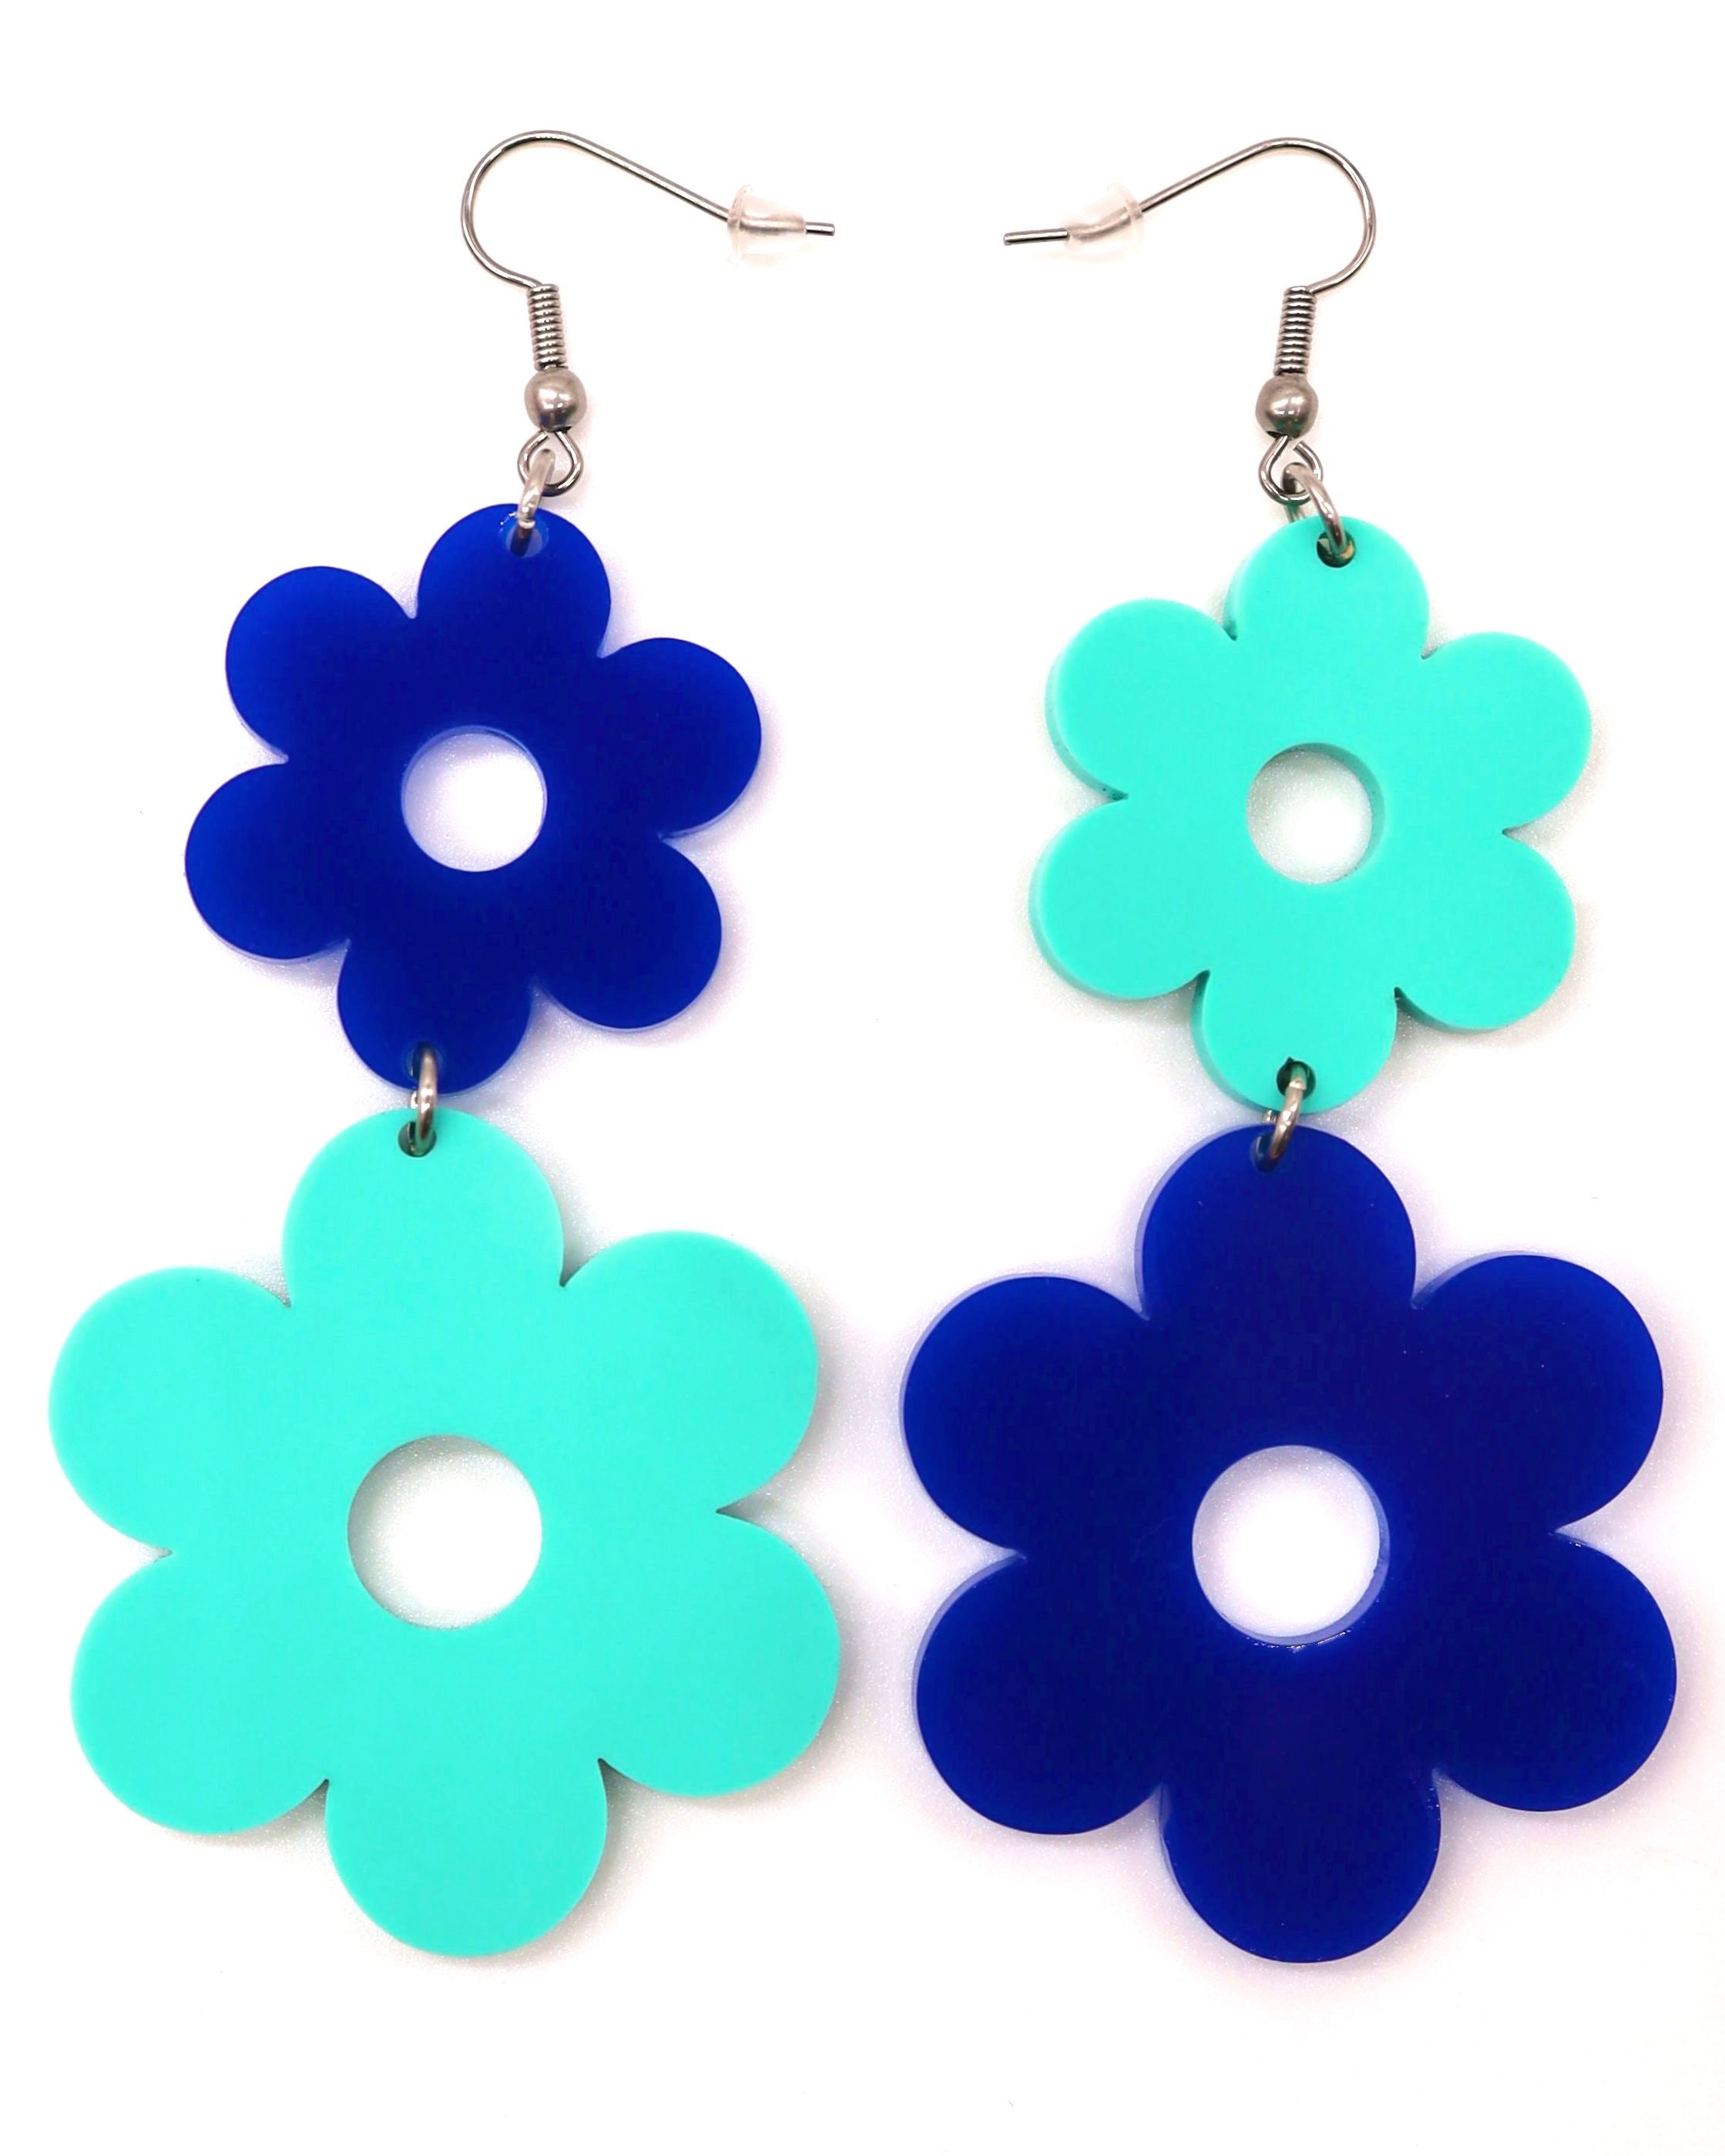 A pair of Flower Power Earrings with alternating blue colored flowers, showcasing a smaller flower on top and a larger flower on the bottom.